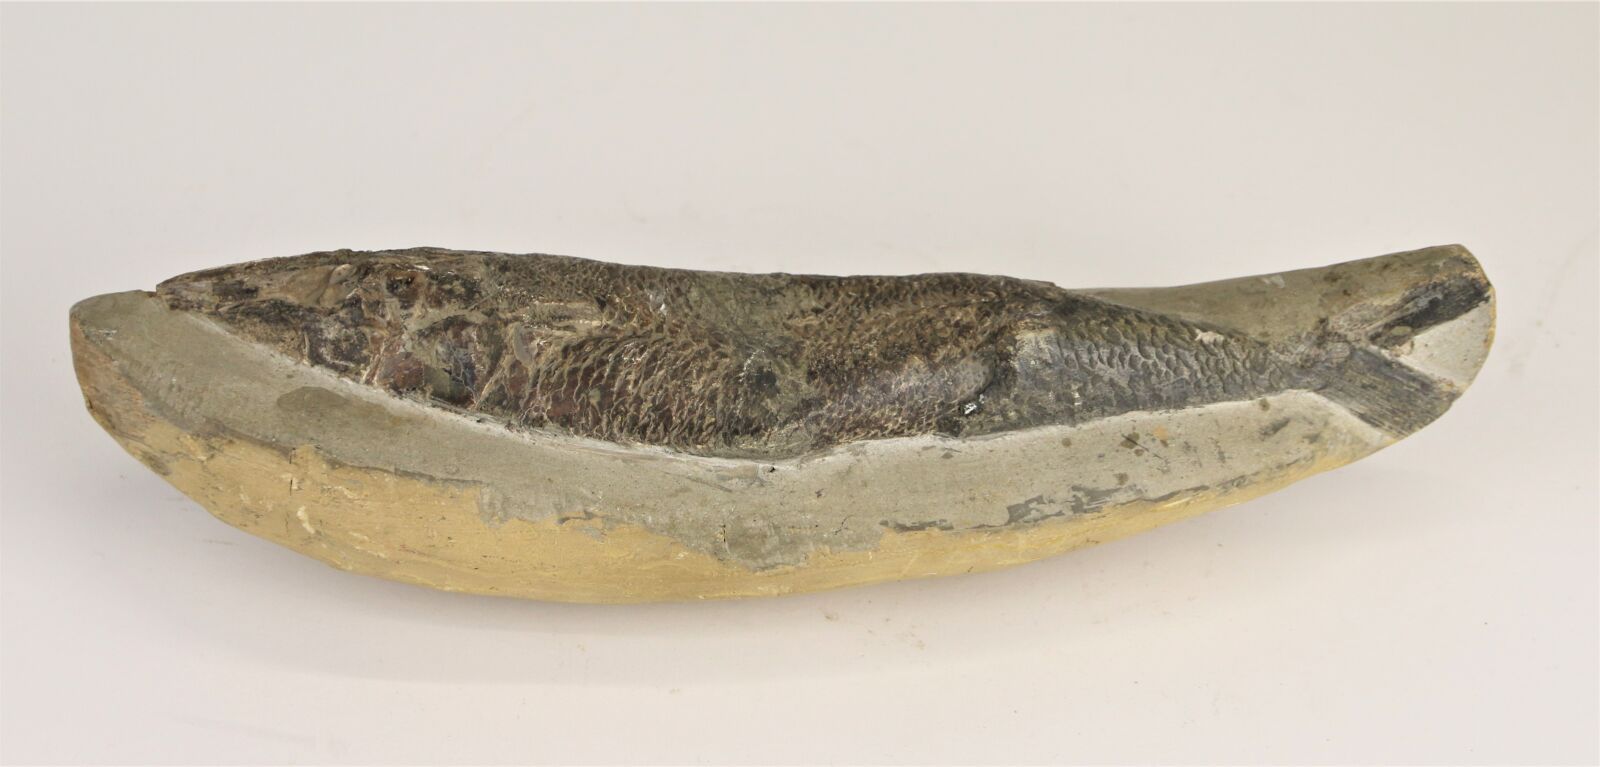 Null Fish fossil.
Length: 30 cm